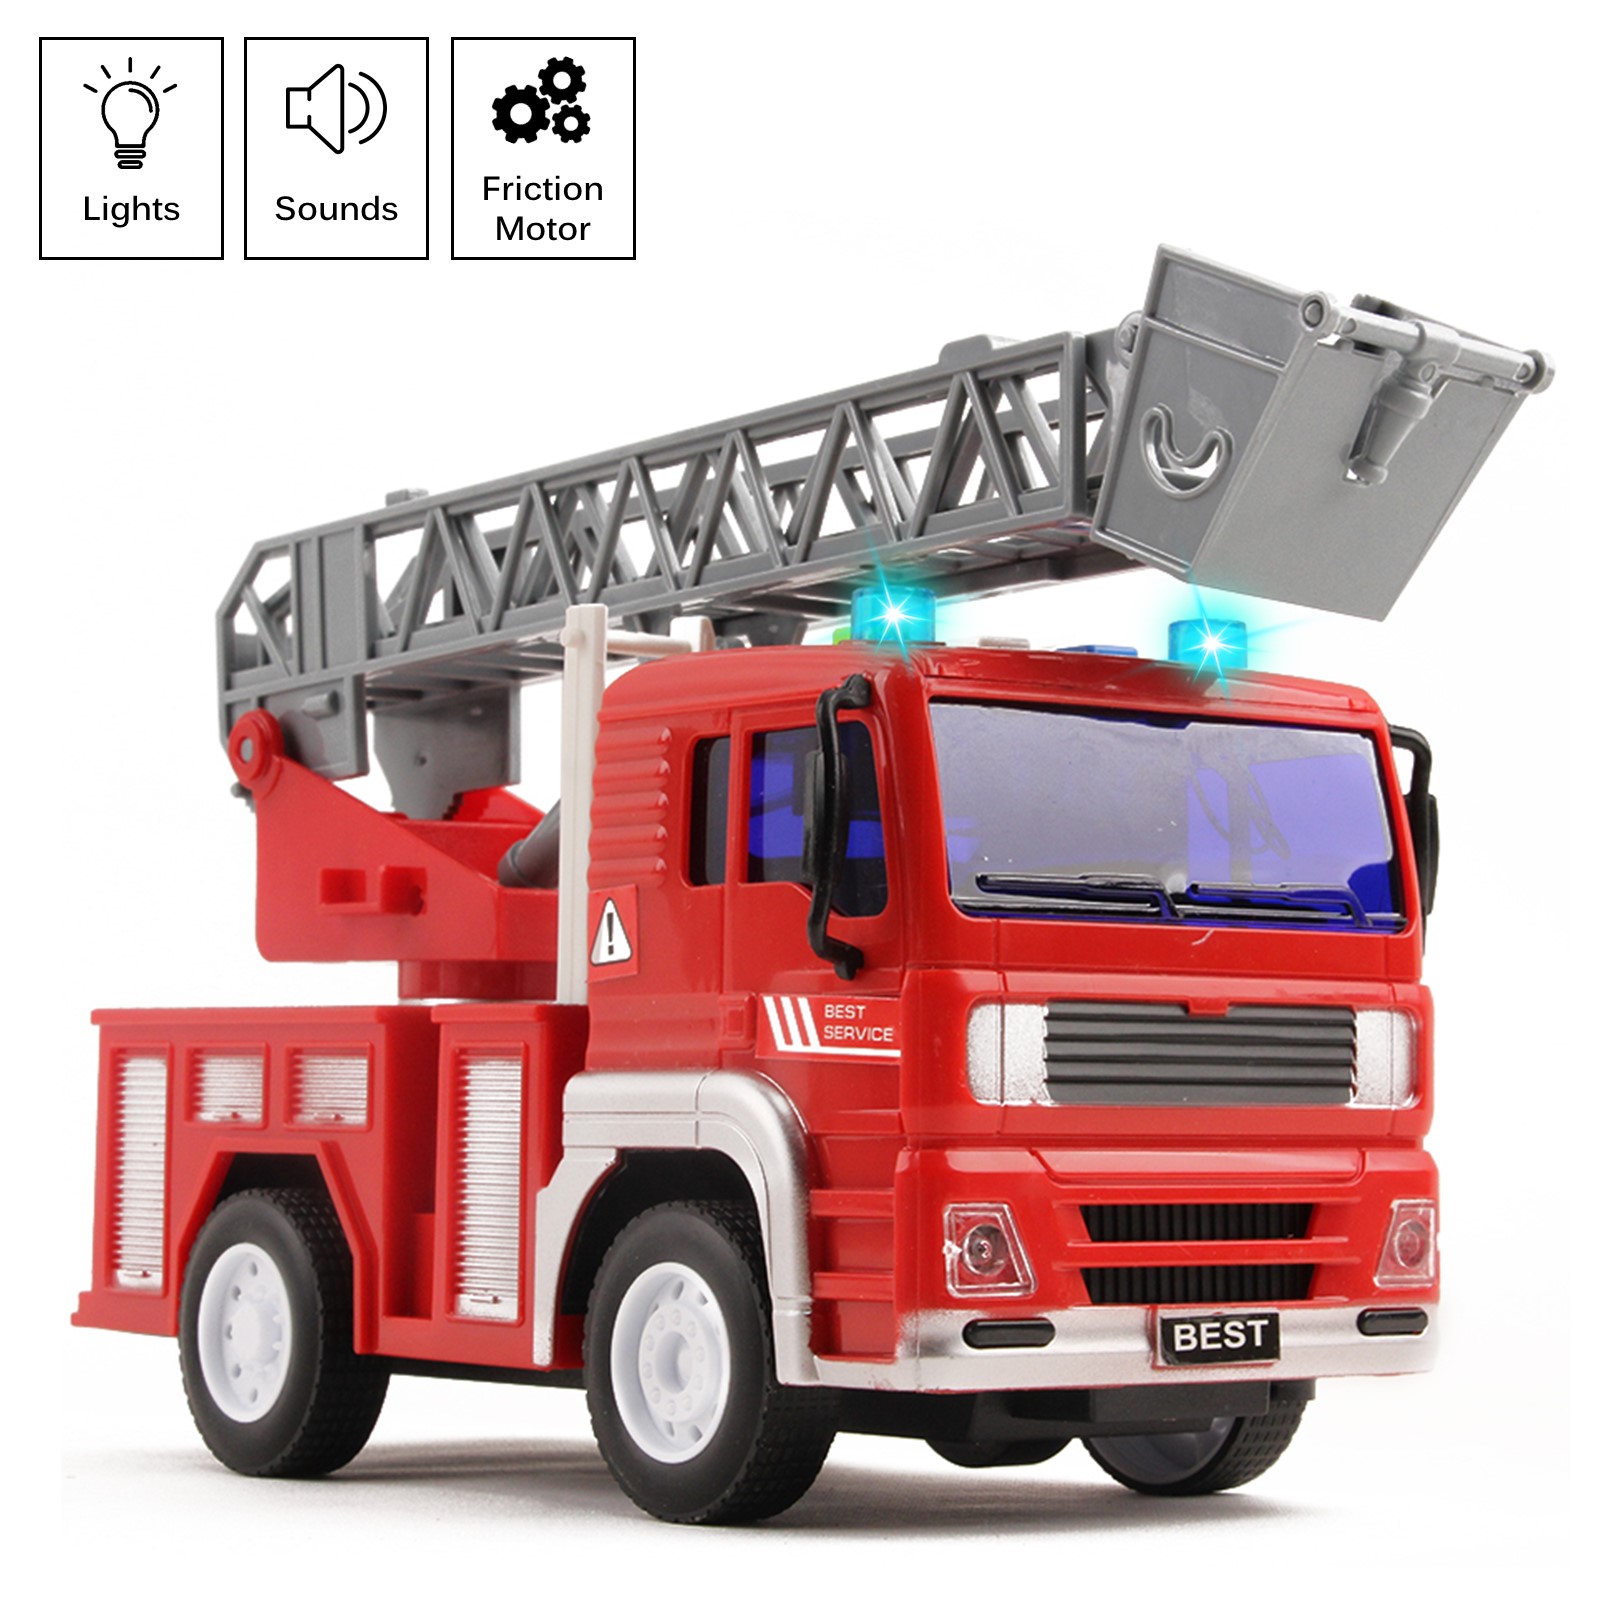 Fire Truck Rescue With Lights And Sounds 12.5" Extending Ladder 360 Rotation Friction Powered Toy Car Kids Push And Go Firetruck Engine Vehicle Pretend Play Great Gift For Children Boys Girls